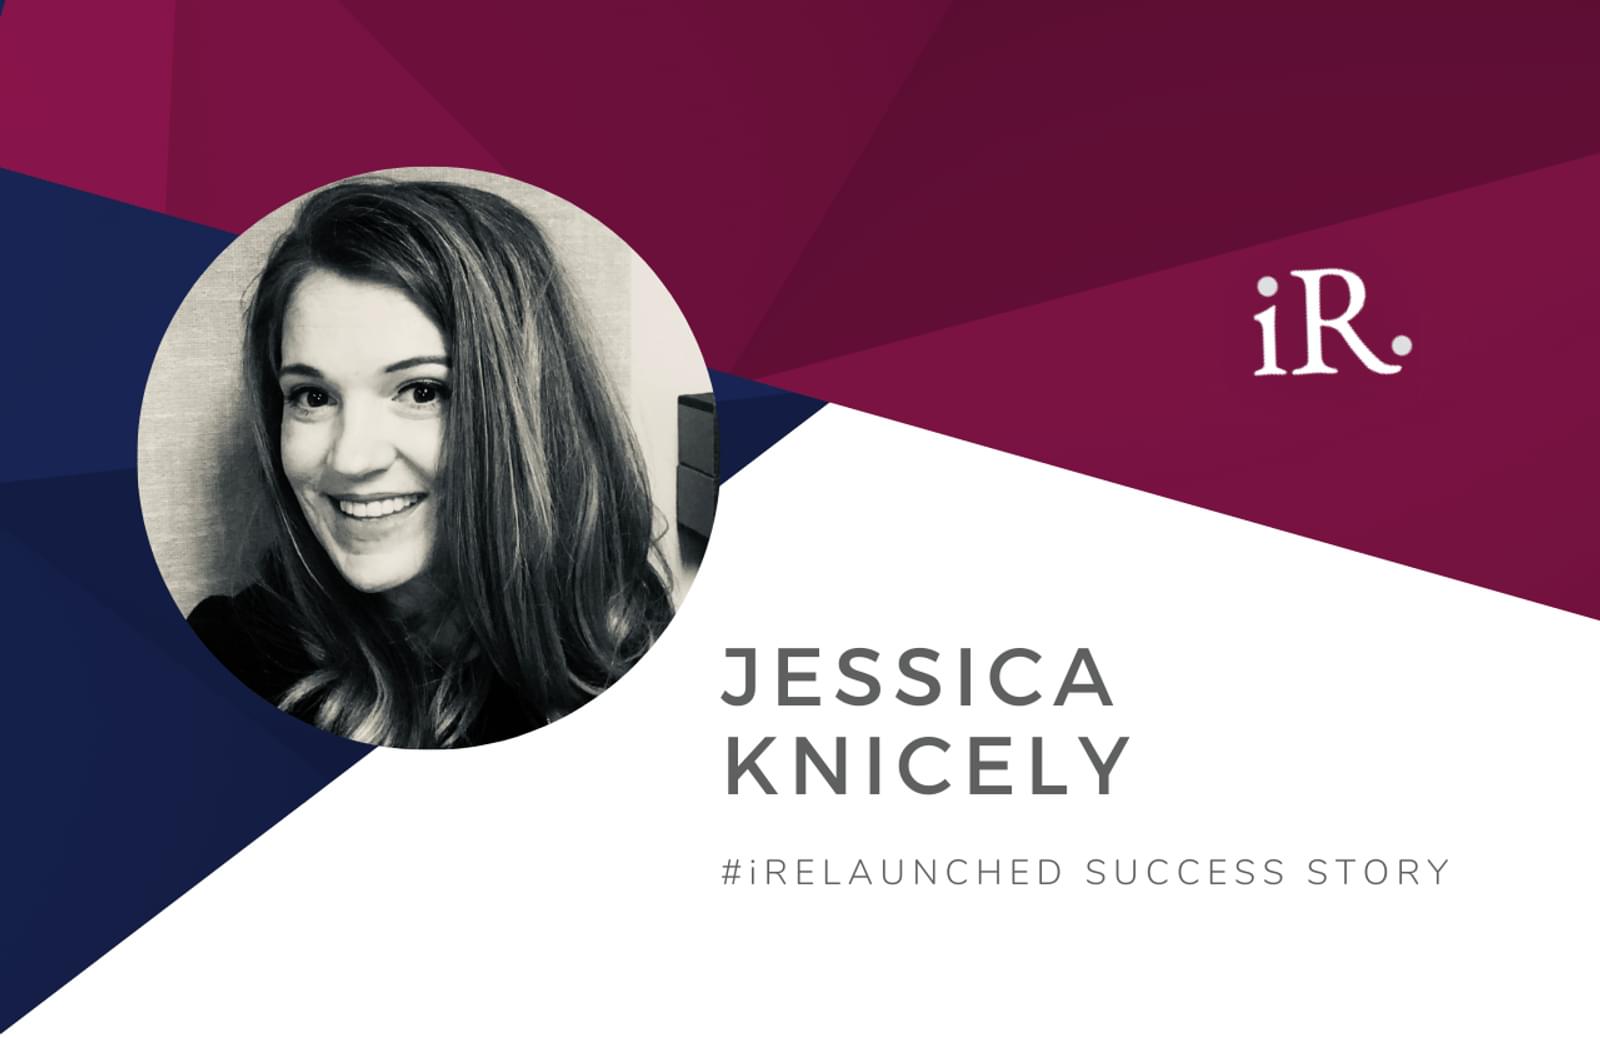 Jessica Knicely's headshot and the text #iRelaunched Success Story along with the iRelaunch logo.  A navy and maroon geometric textured background intersect behind Jessica's headshot.